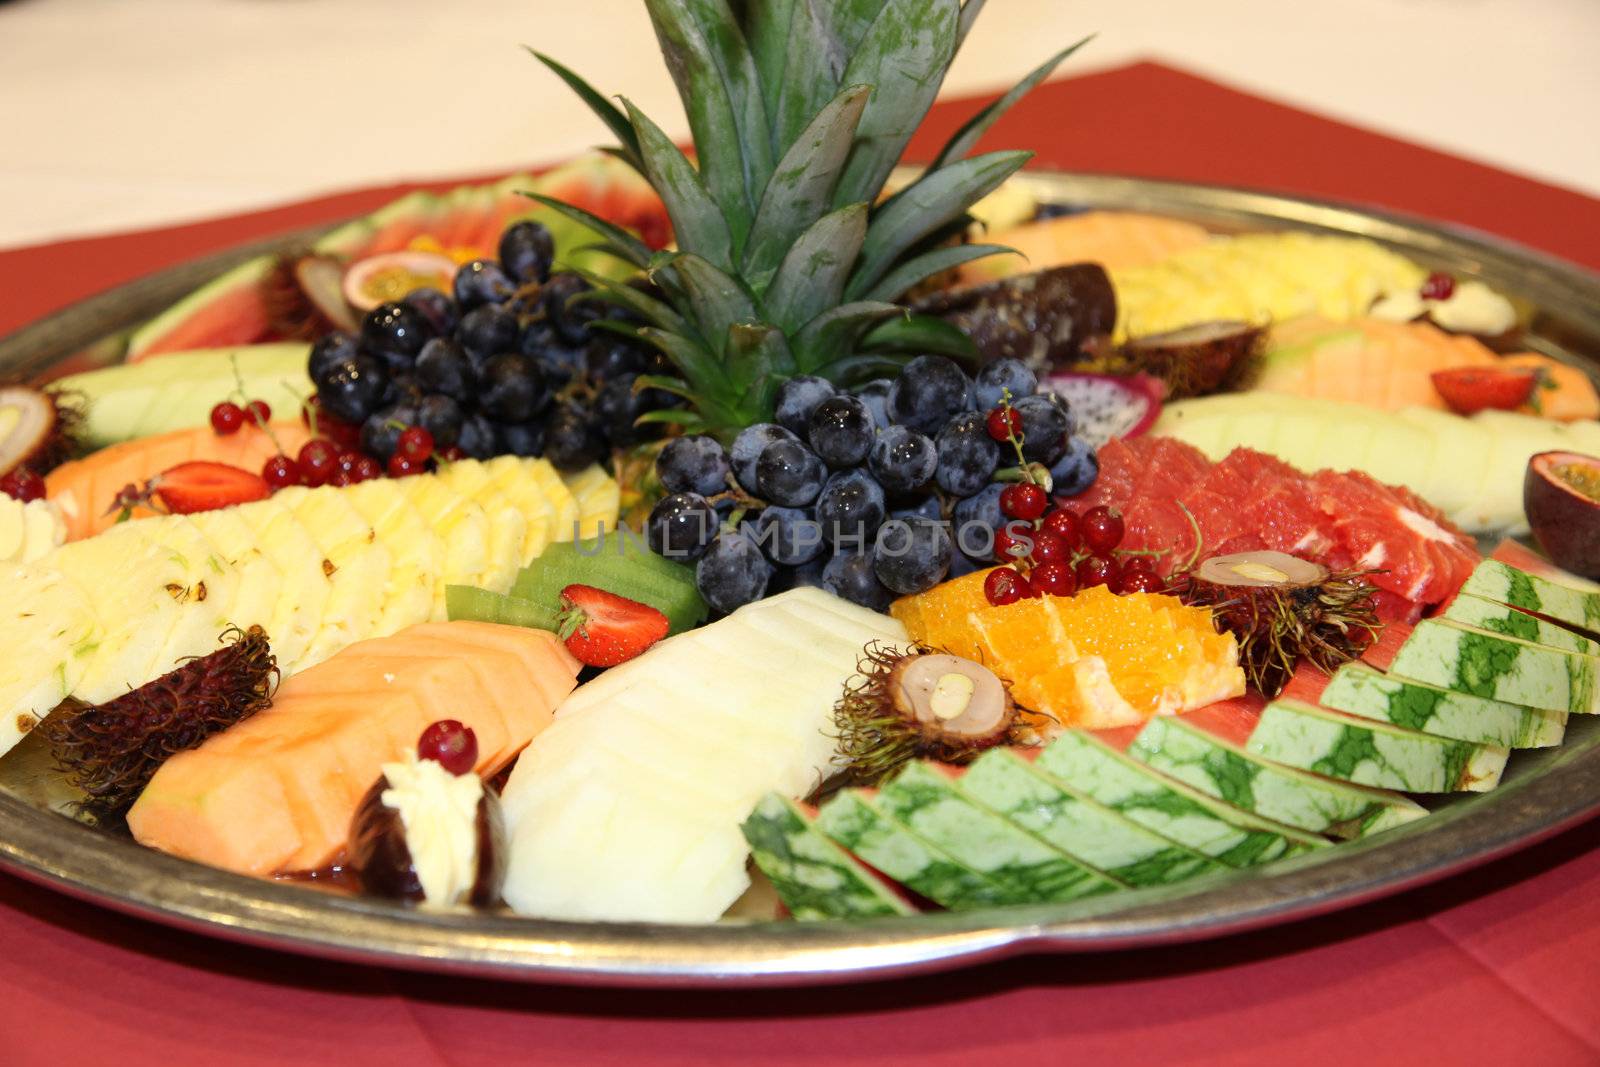  Plate of assorted fruit, cut fruit - served appetizing